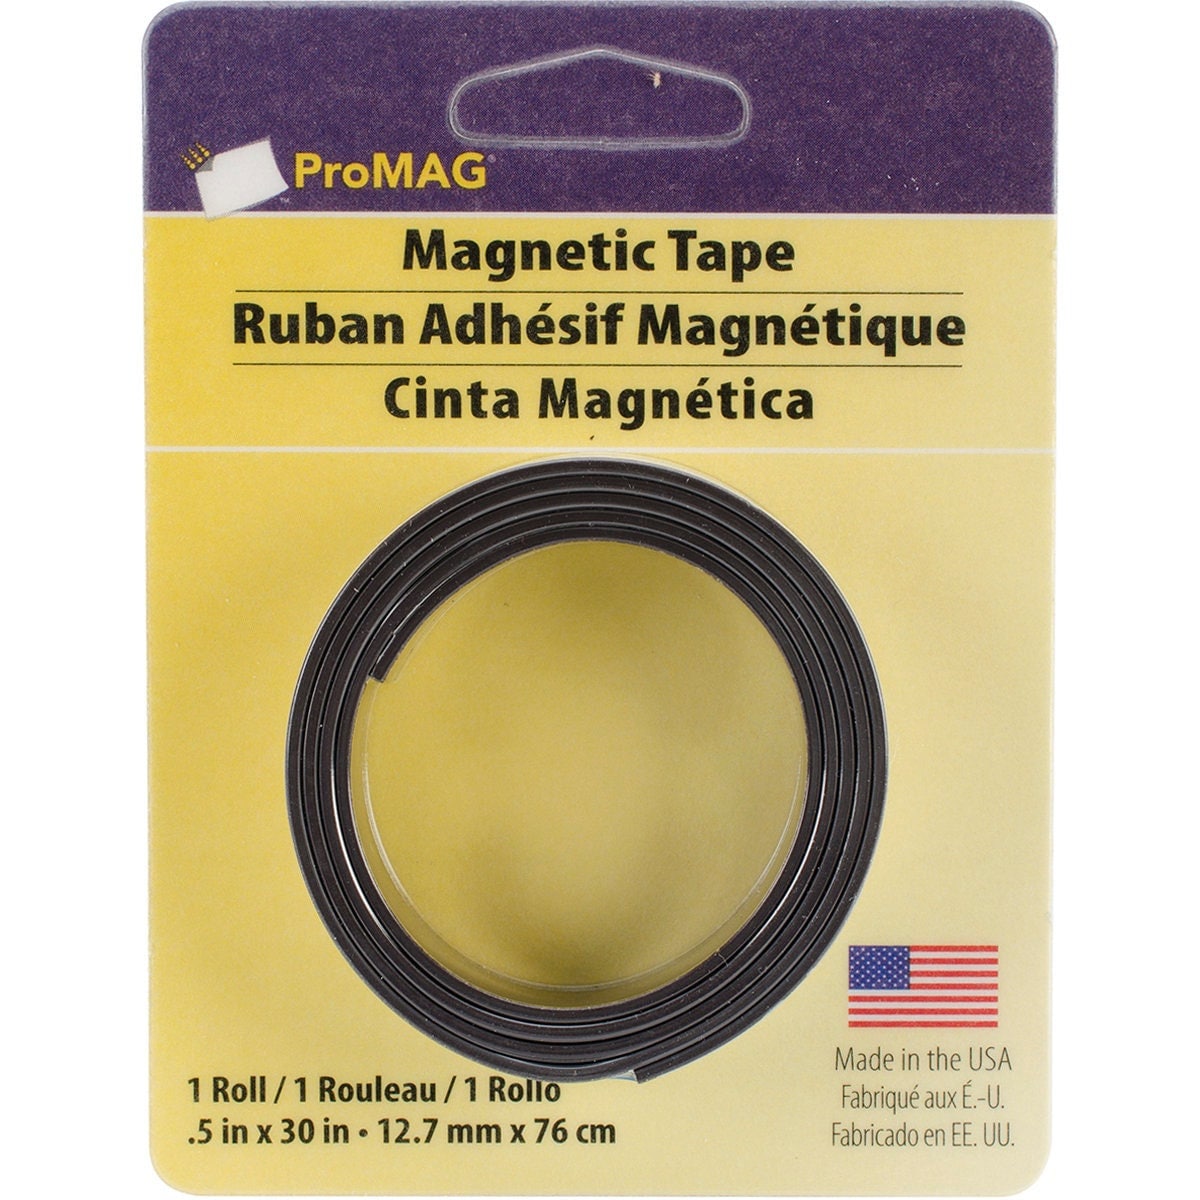 Mr. Pen- Flexible Magnetic Tape, 1/2 inch x 10 Feet, Magnetic Strip, Magnets with Adhesive Backing, Magnetic Strips with Adhesive Backing, Magnet